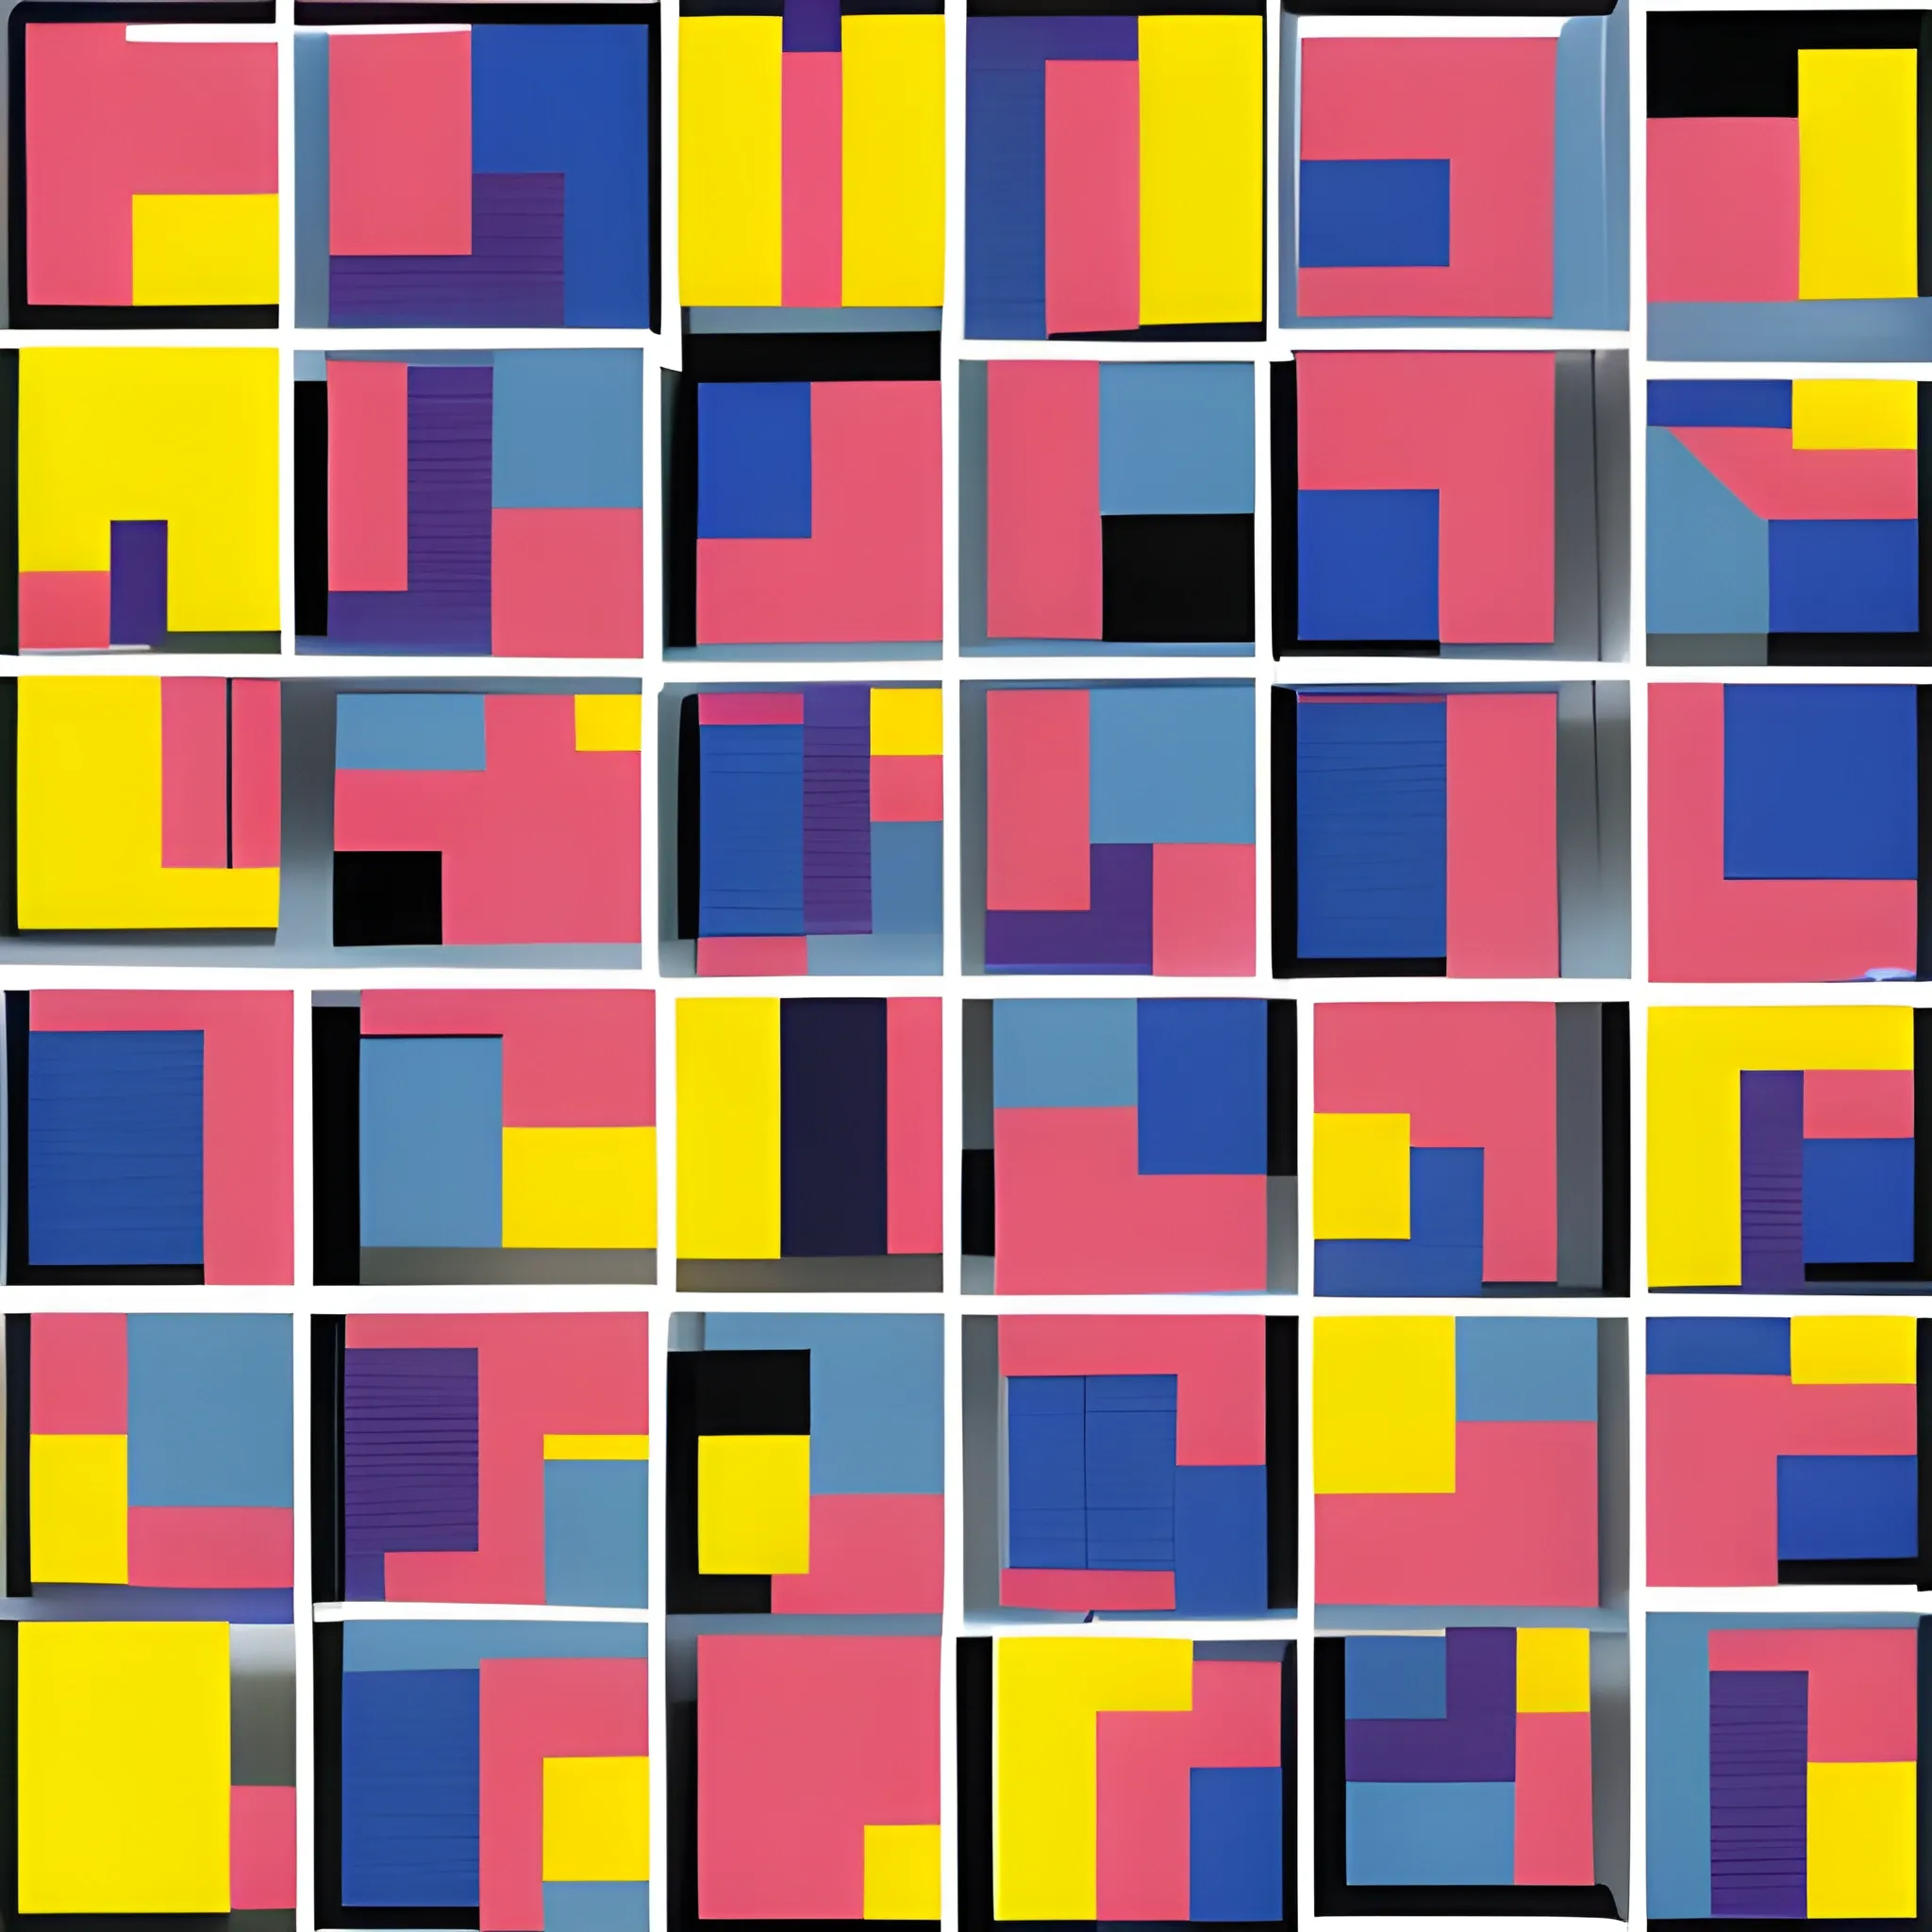 A collage of colorful rectangular blocks with some gaps between them, placed in such a way as to create the image of a woman